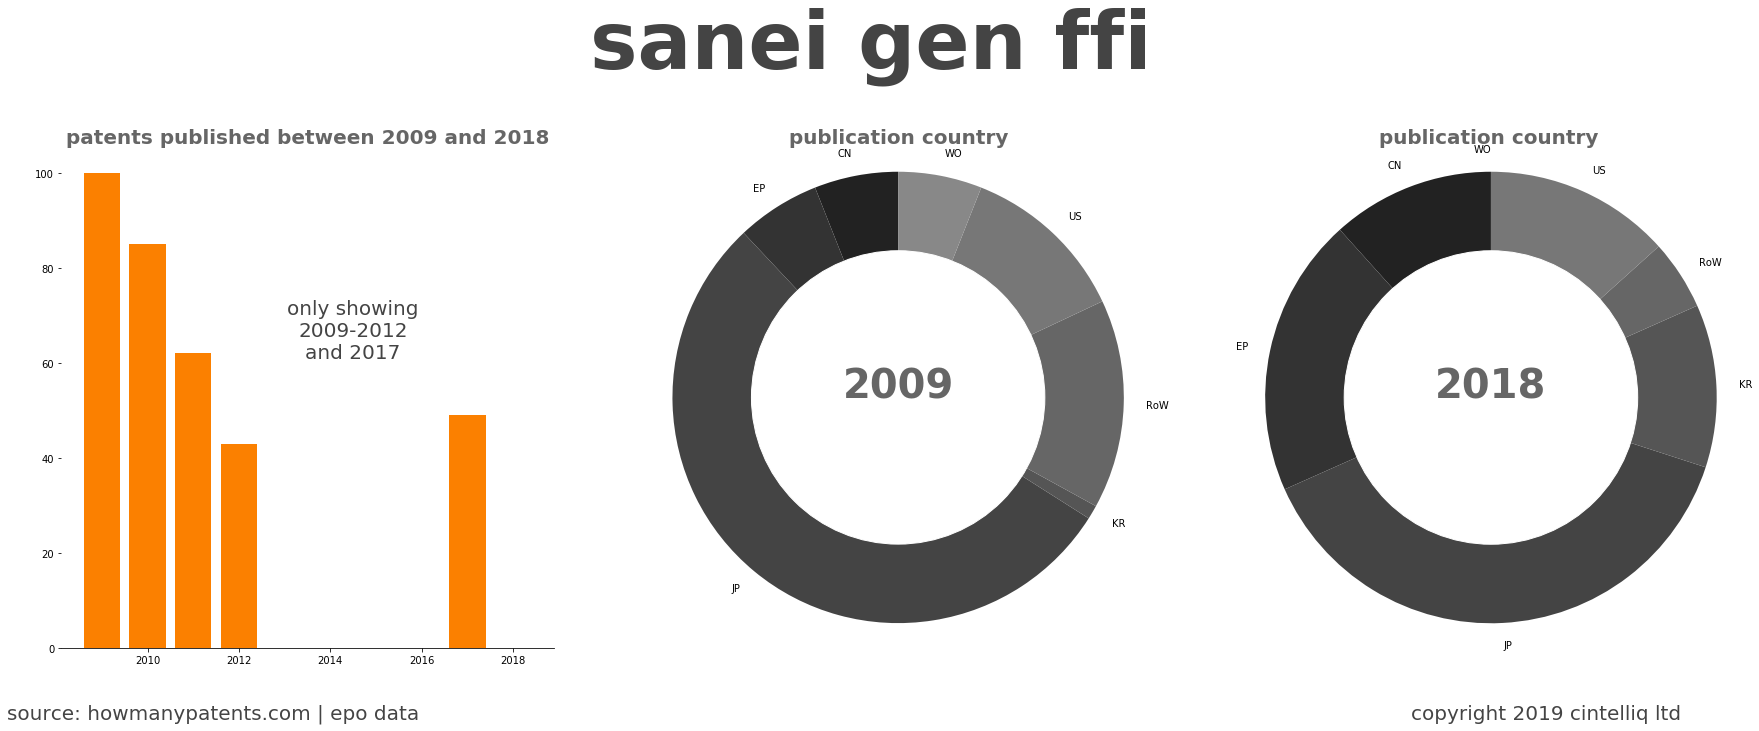 summary of patents for Sanei Gen Ffi